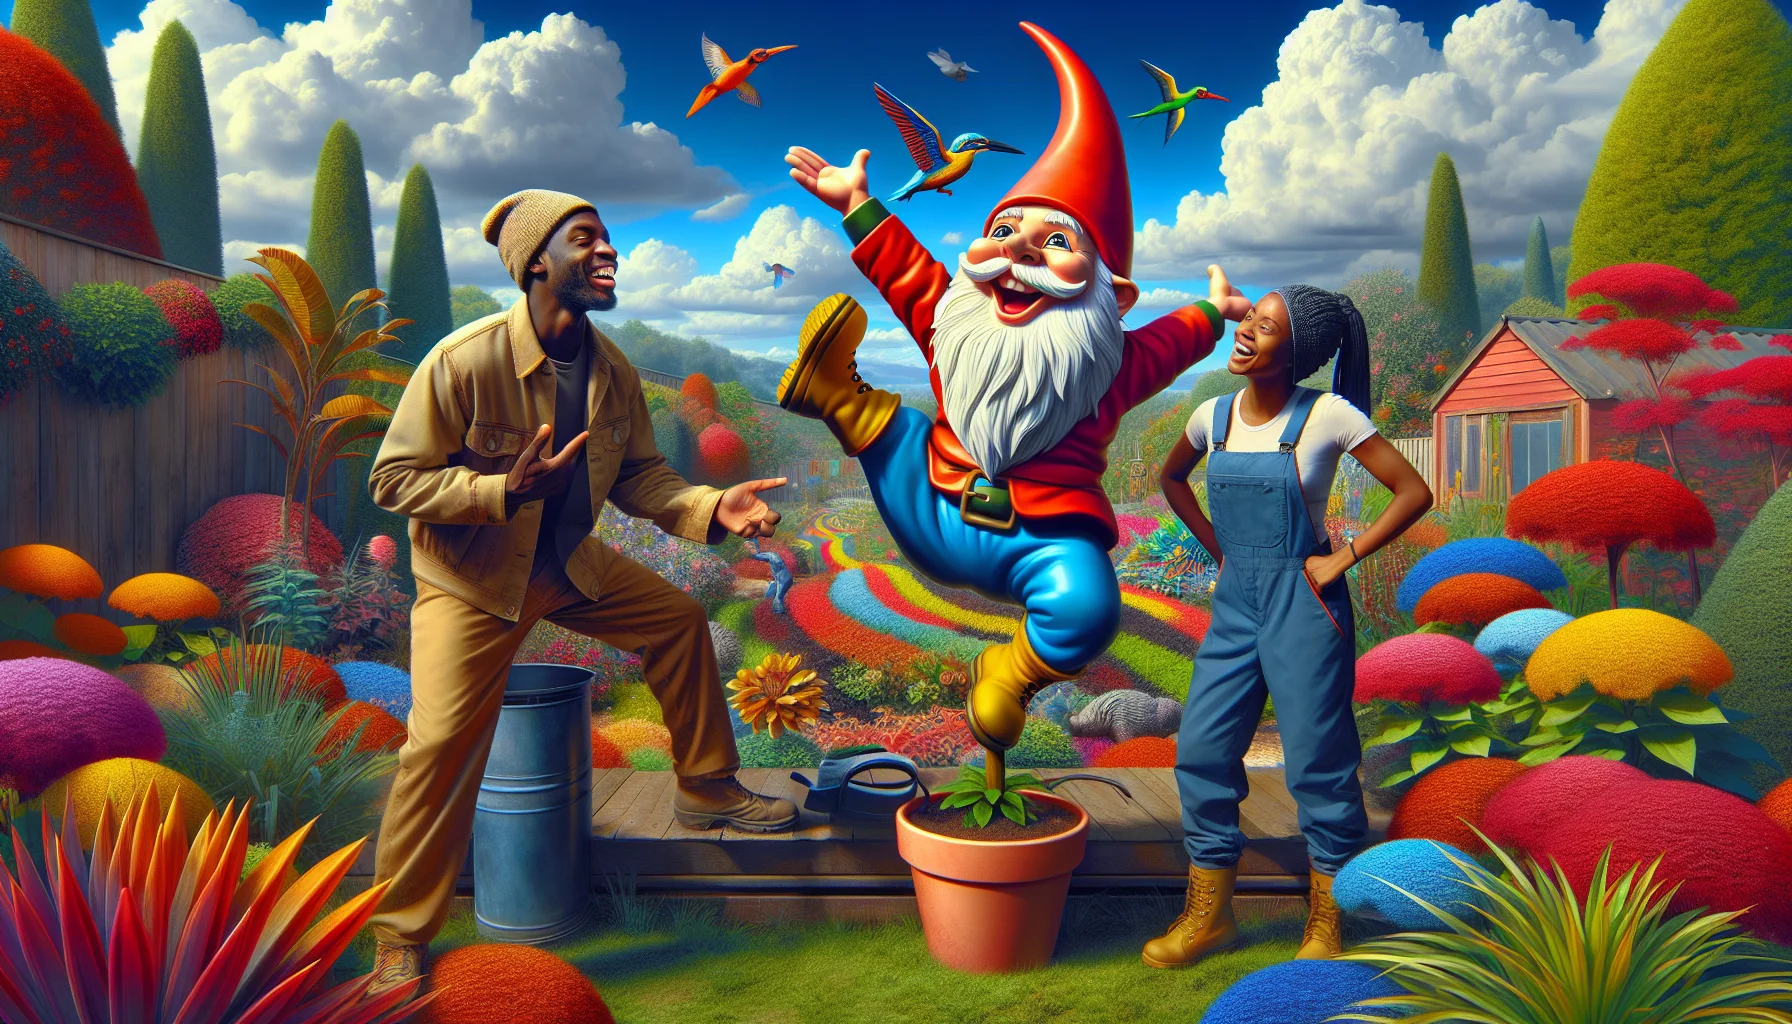 Generate a detailed and realistic image that represents a humorous scene centered around Unique Garden Art. This situation could feature a South Asian man and a Black woman, both wearing gardening attire, laughing and pointing at a vibrant gnome with an oversized hat. The gnome could be striking a funny, unexpected pose, such as doing a handstand, which would evoke amusement and illustrate the unexpected joy that can come from gardening and exploring garden art. The background should be filled with a lush environment teeming with a diverse range of colorful, blooming plants, and the sky above filled with fluffy white clouds that accentuate the happy, light-hearted atmosphere.